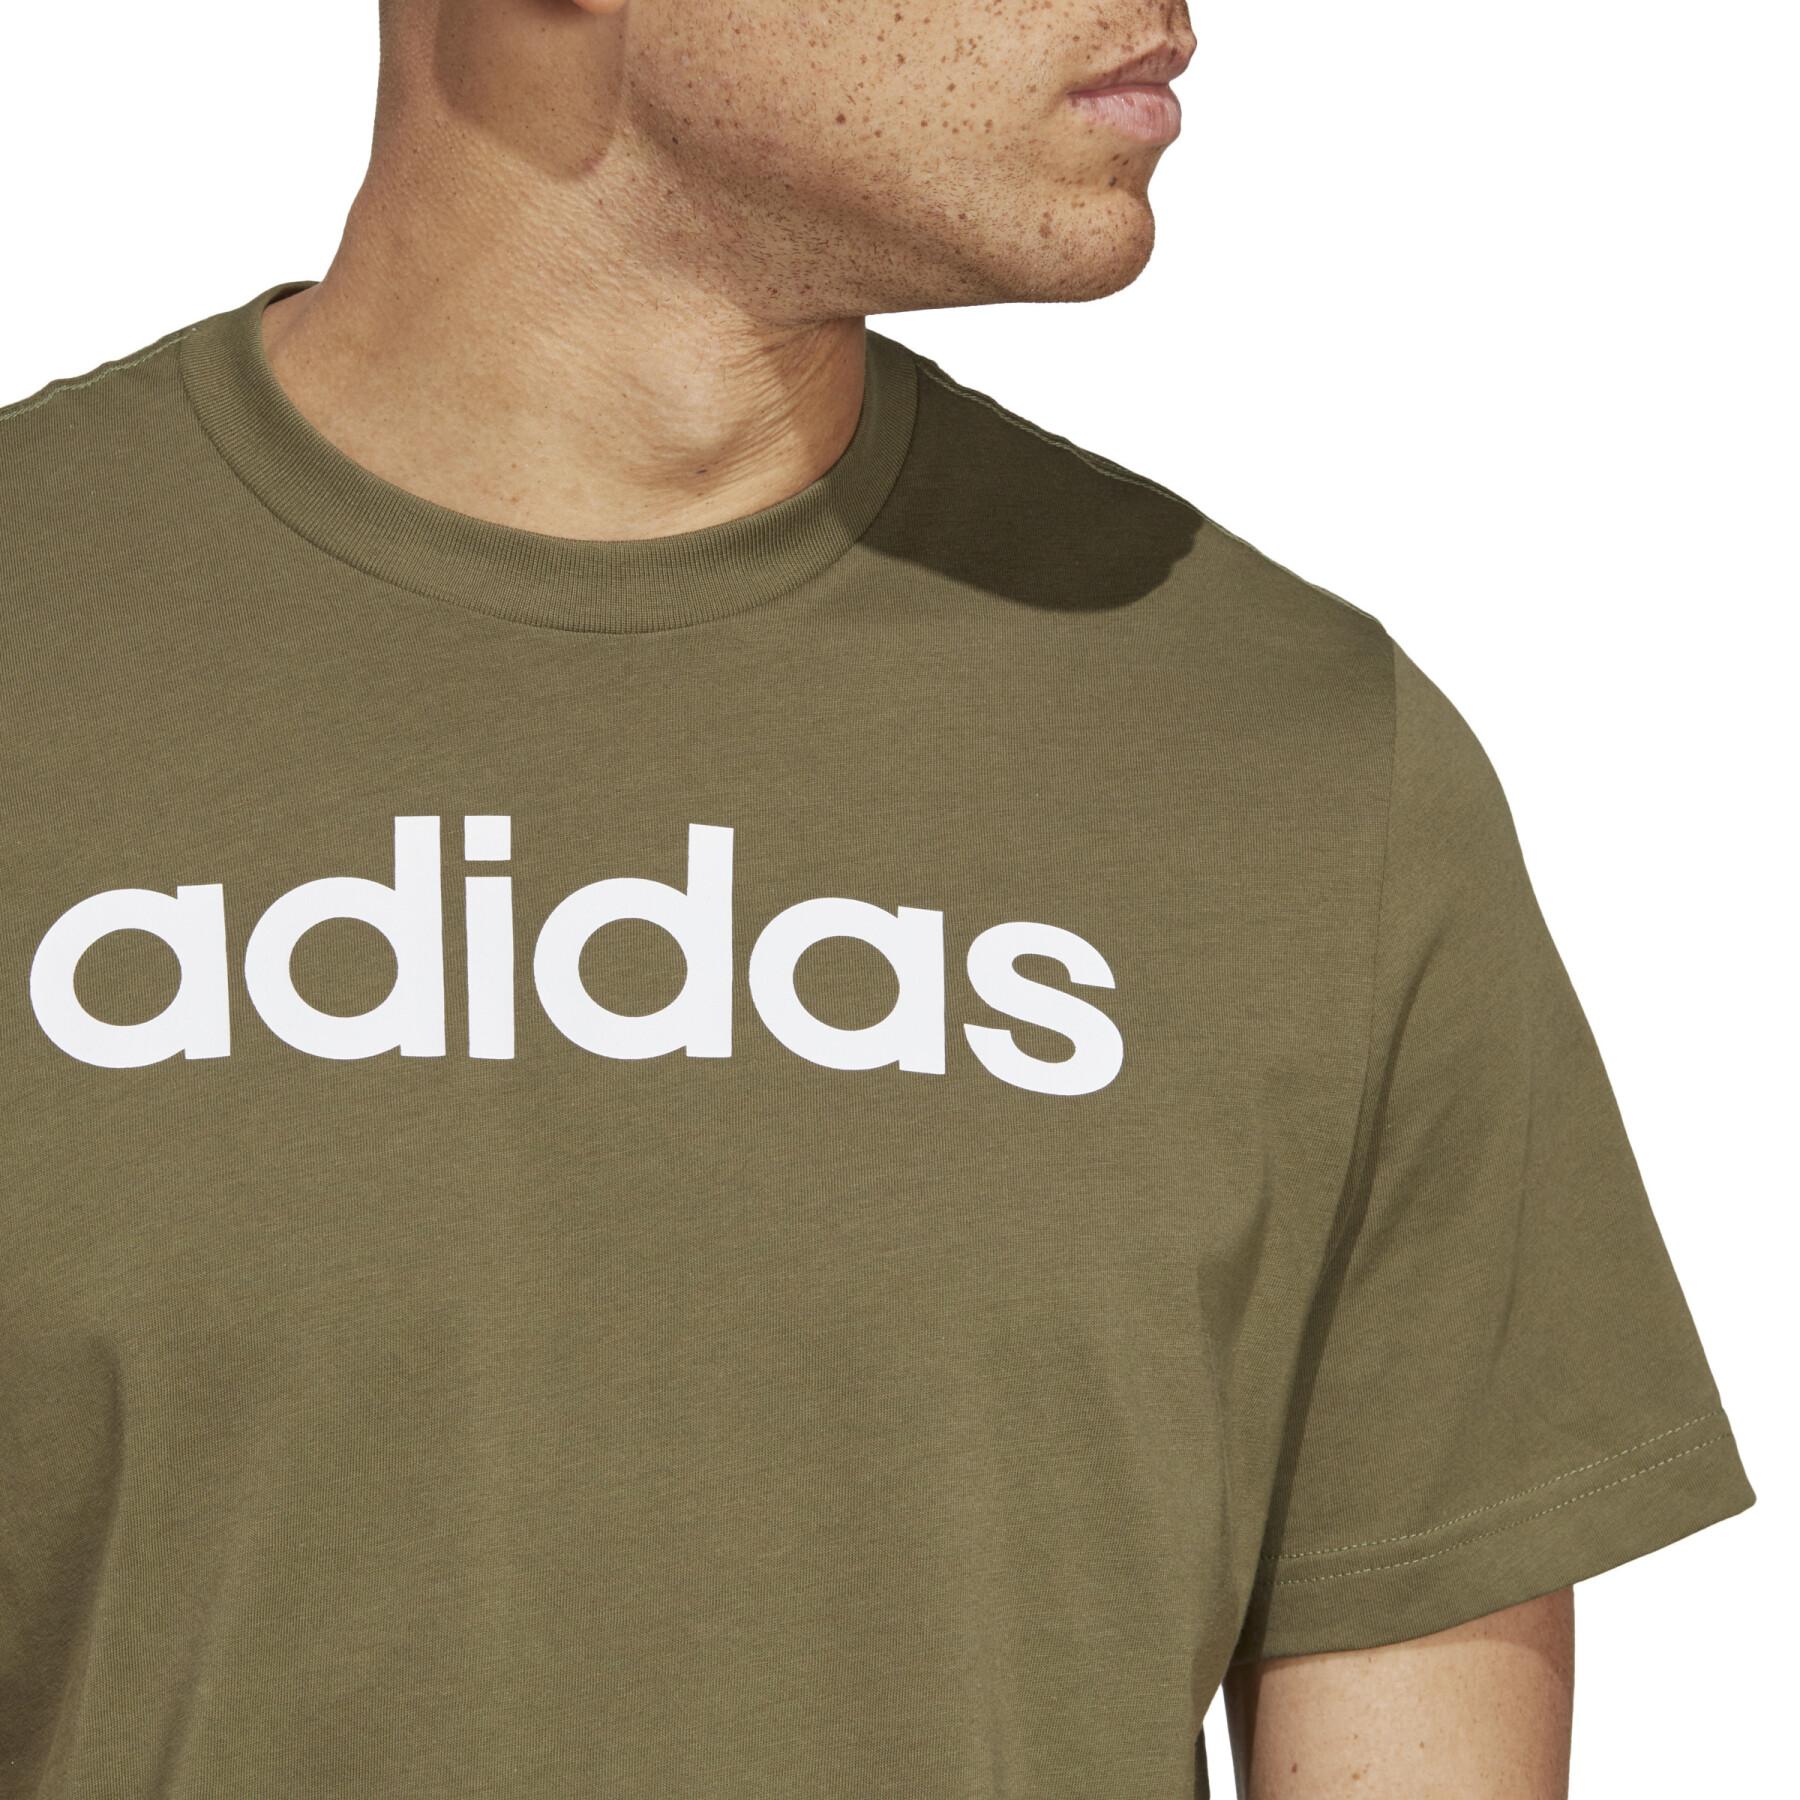 Jersey T-shirt adidas Essentials Linear Embroidered Logo